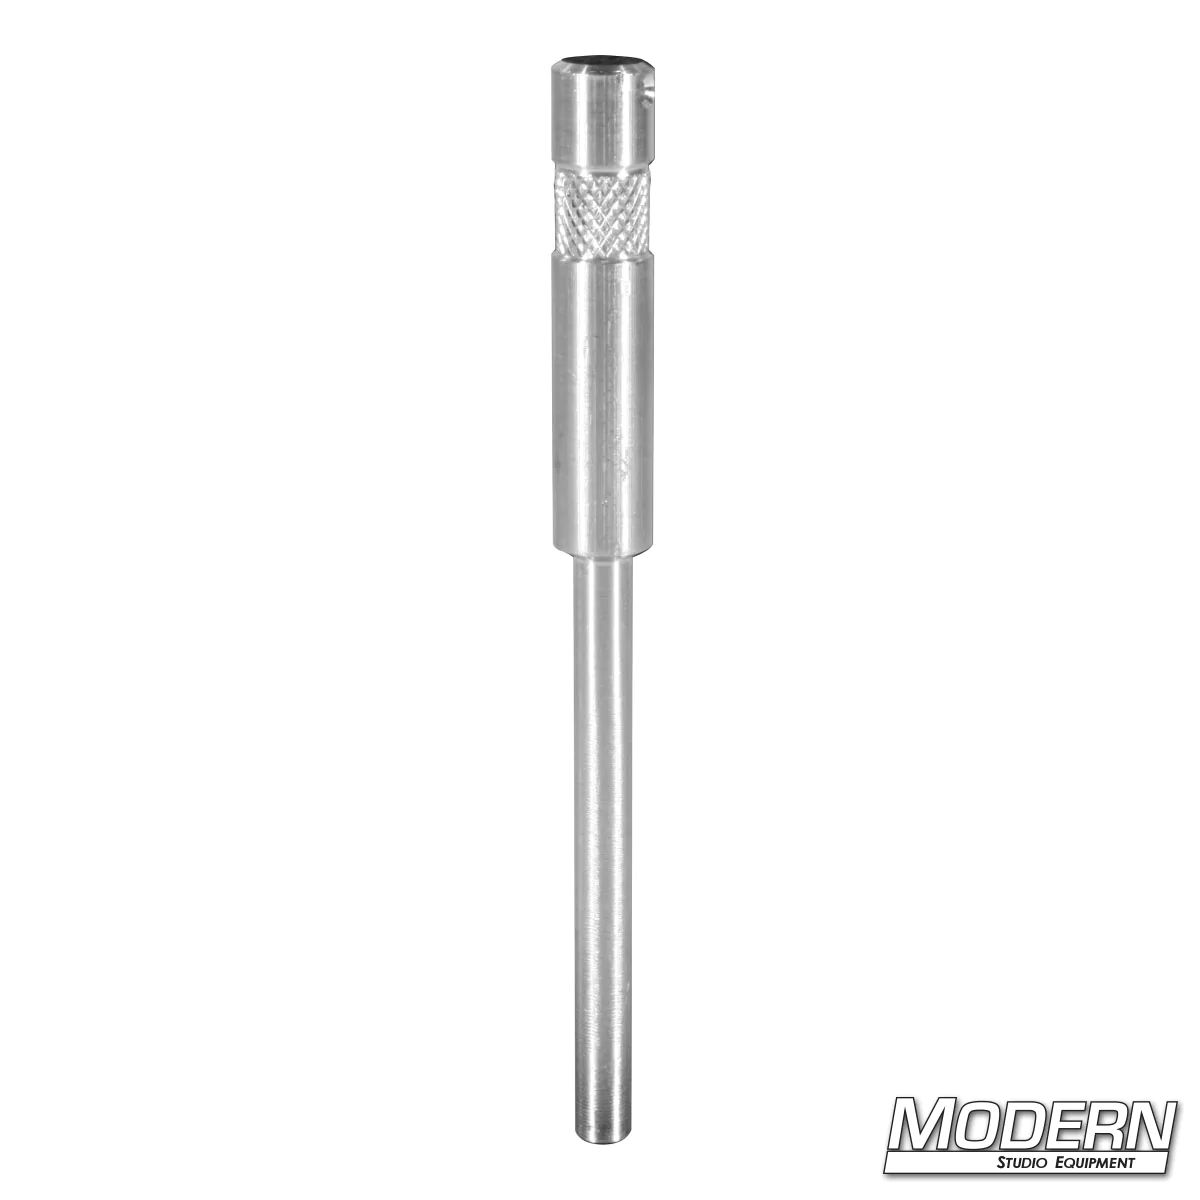 Aluminum Modern Pin (3/8-inch to 5/8-inch)